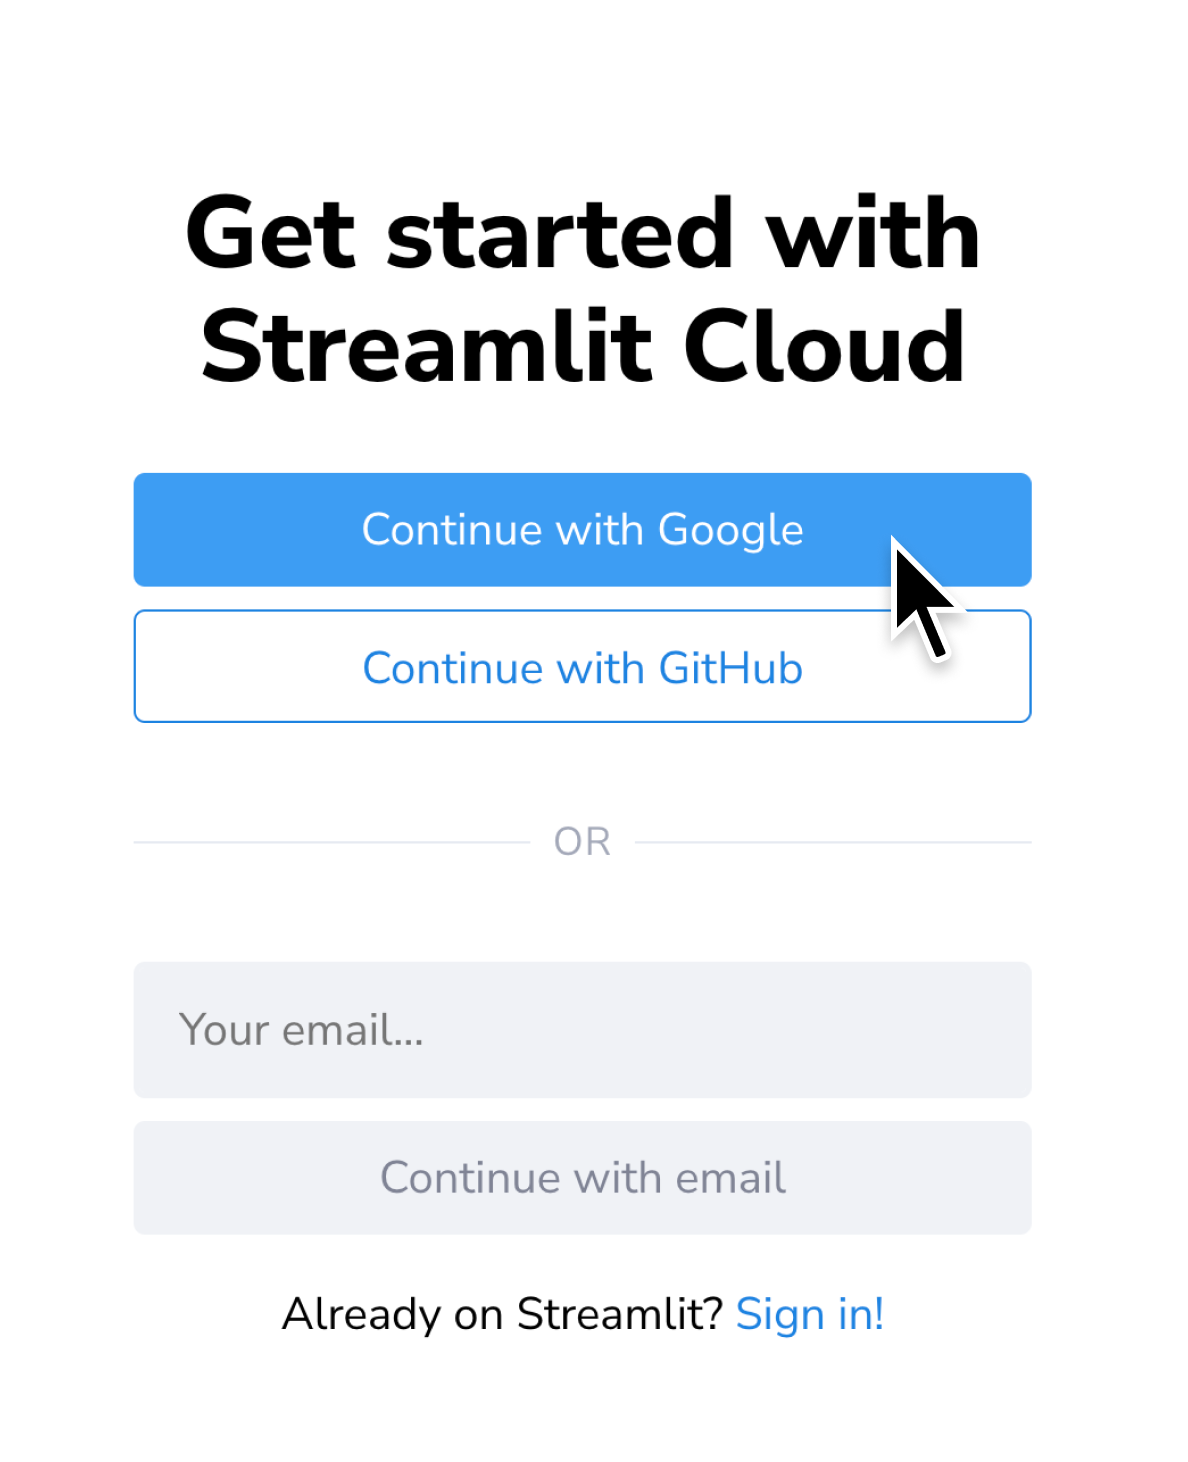 Sign up for Streamlit Community Cloud with Google